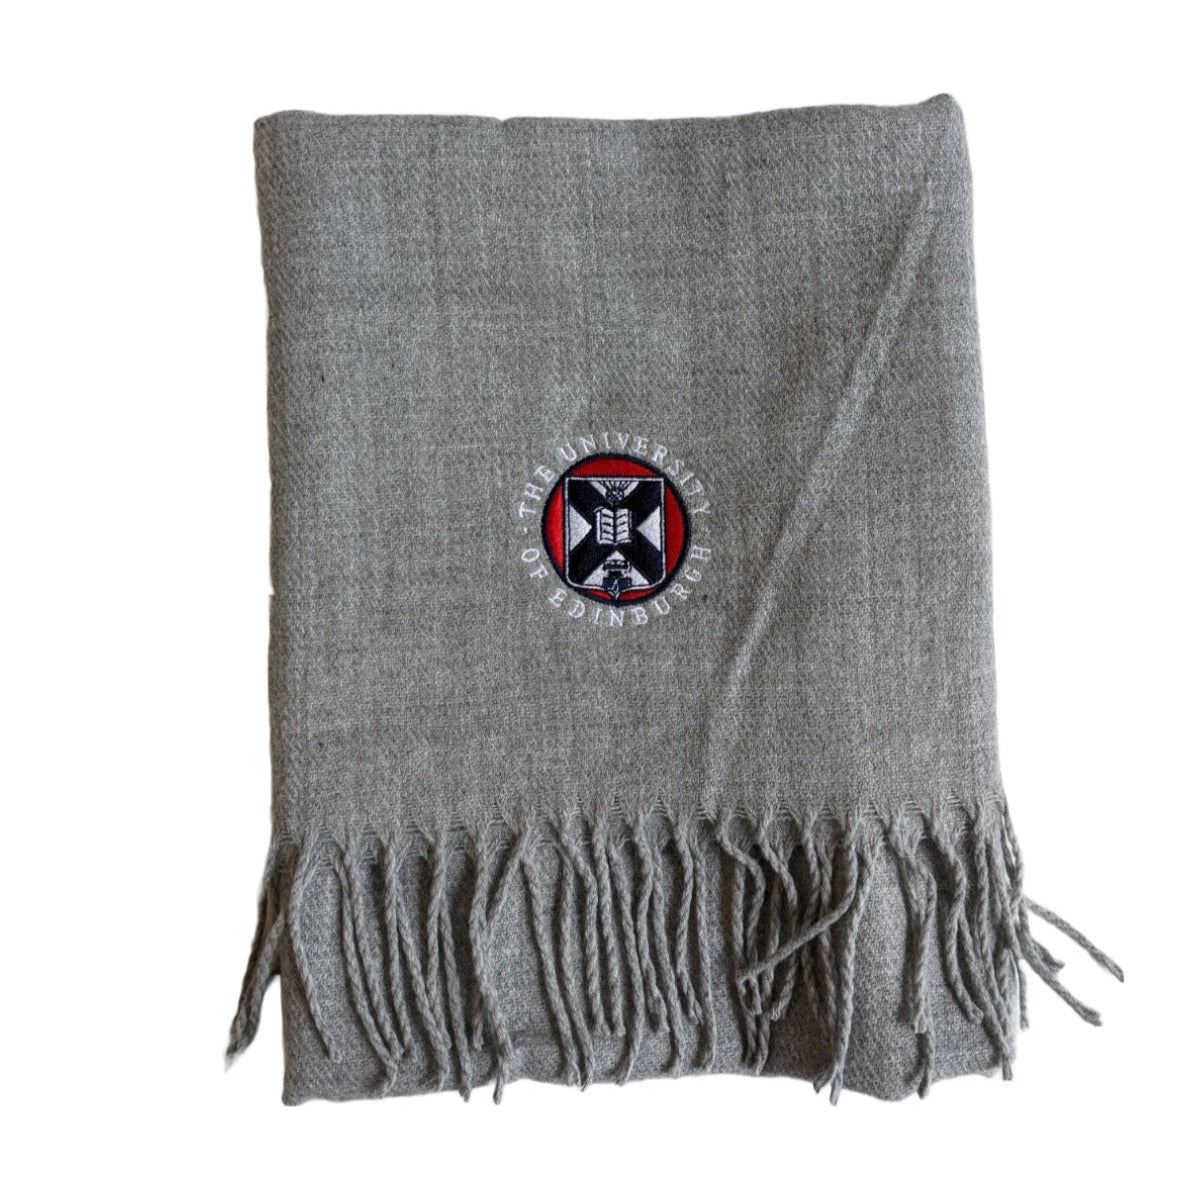 Embroidered Crest University Scarf